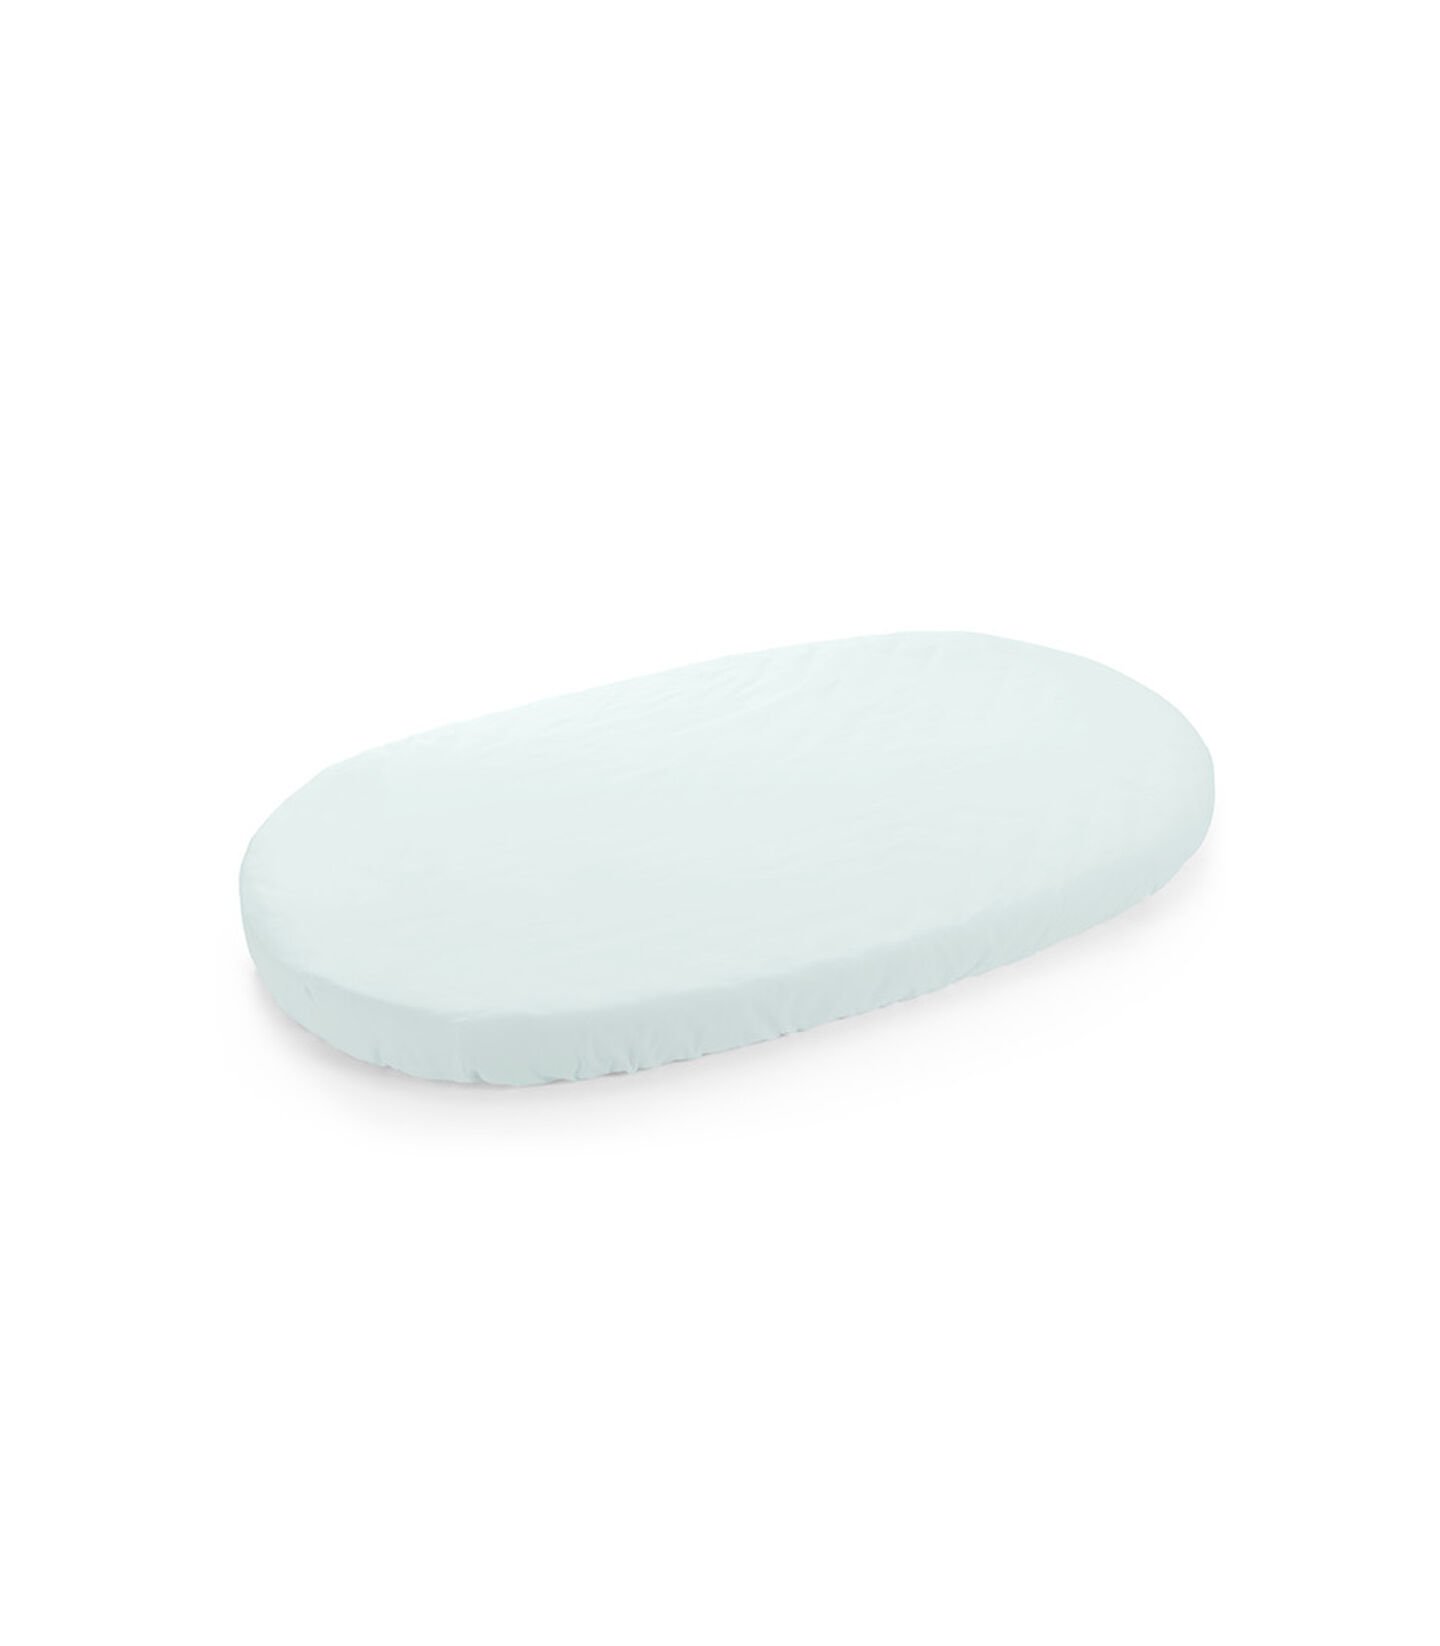 Stokke® Sleepi™ Fitted Sheet Mint, Zachtblauw, mainview view 1